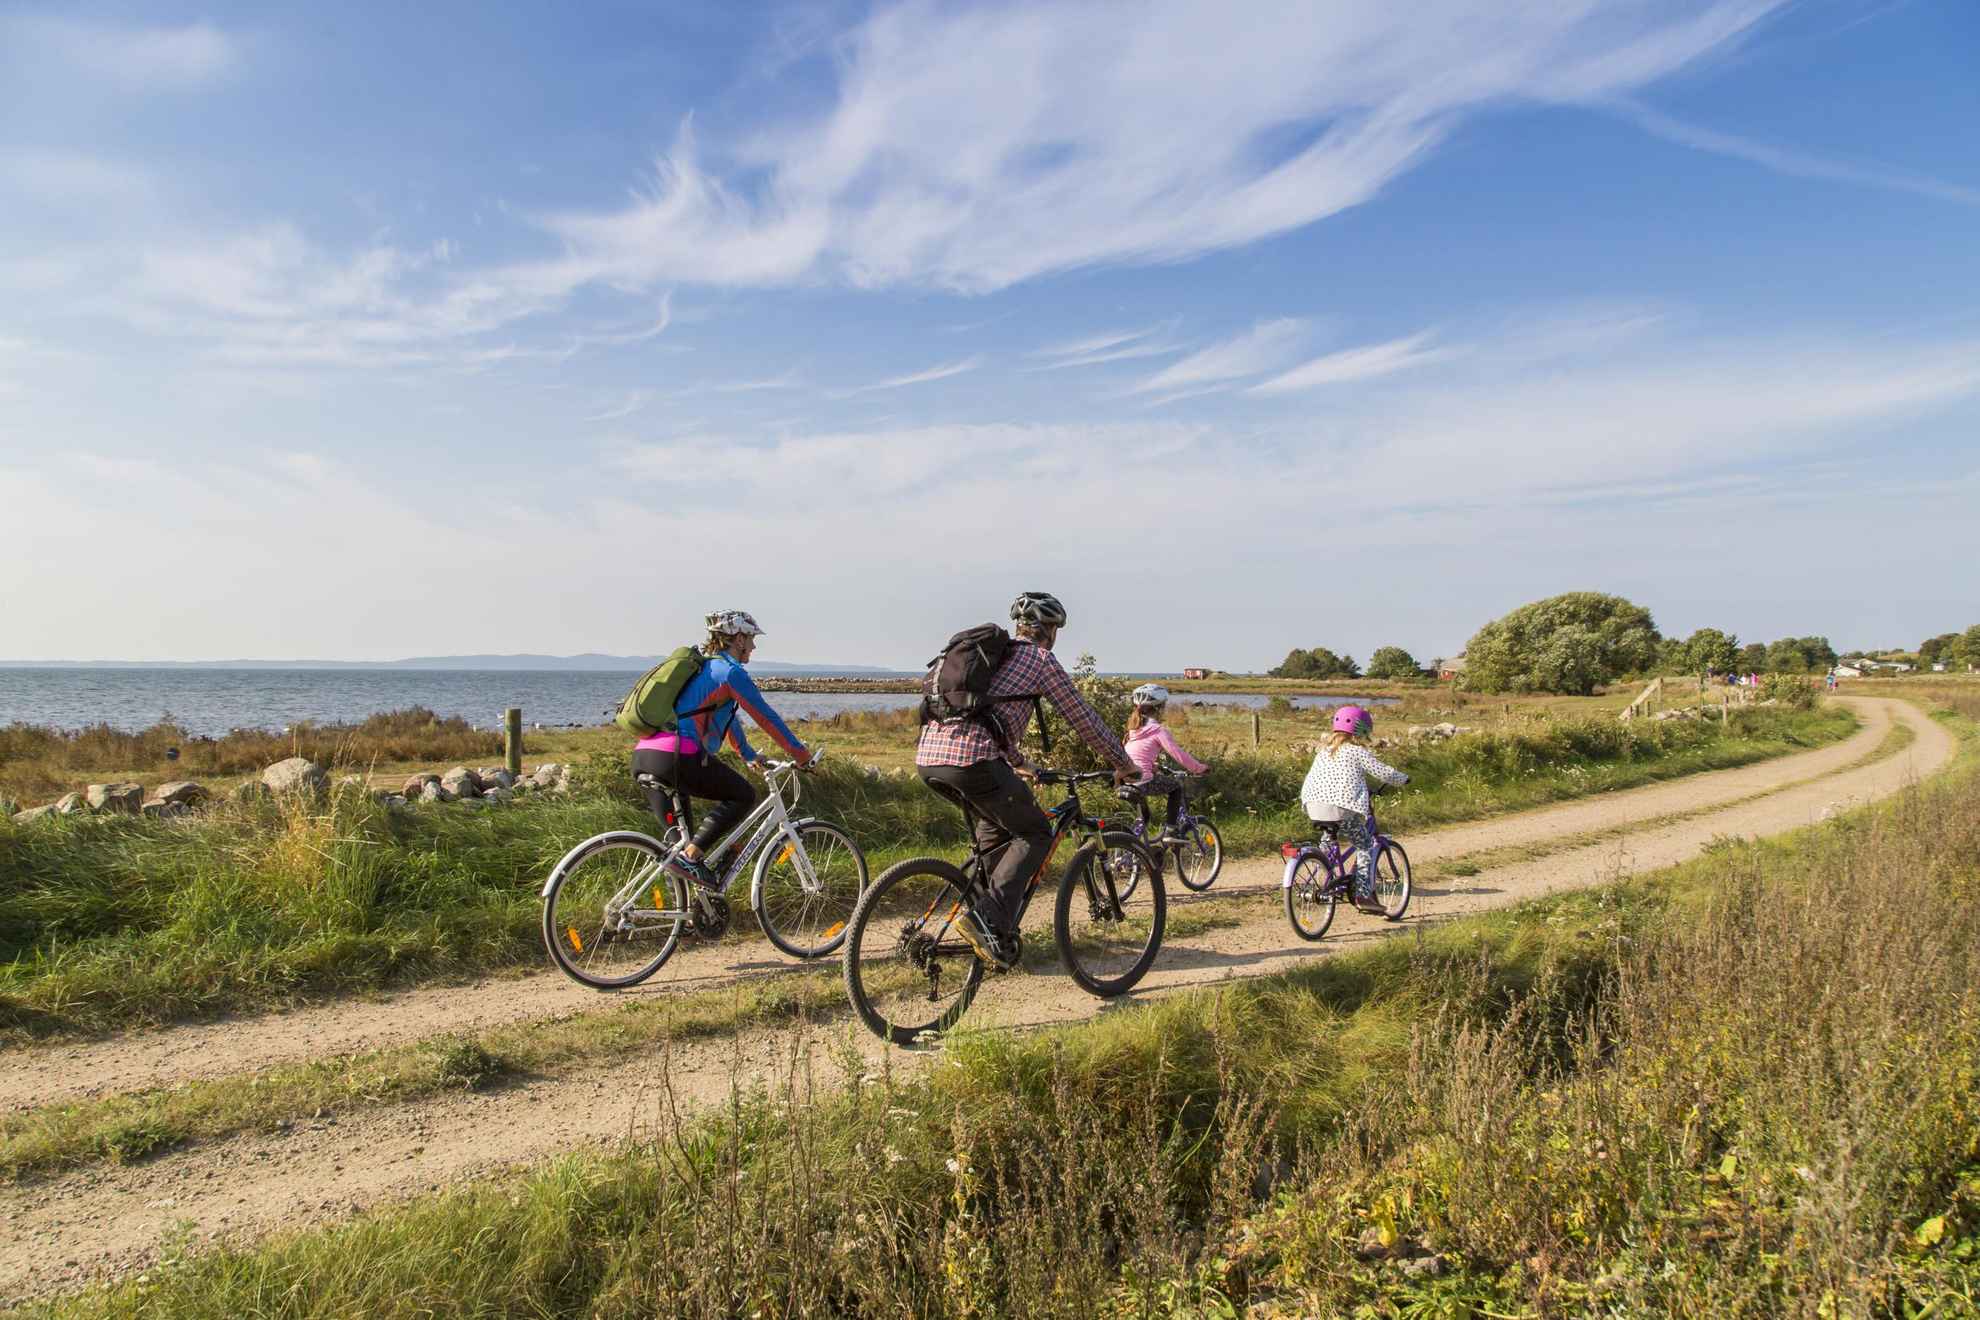 Two parents with two kids biking on a country road by the coast in Skåne.